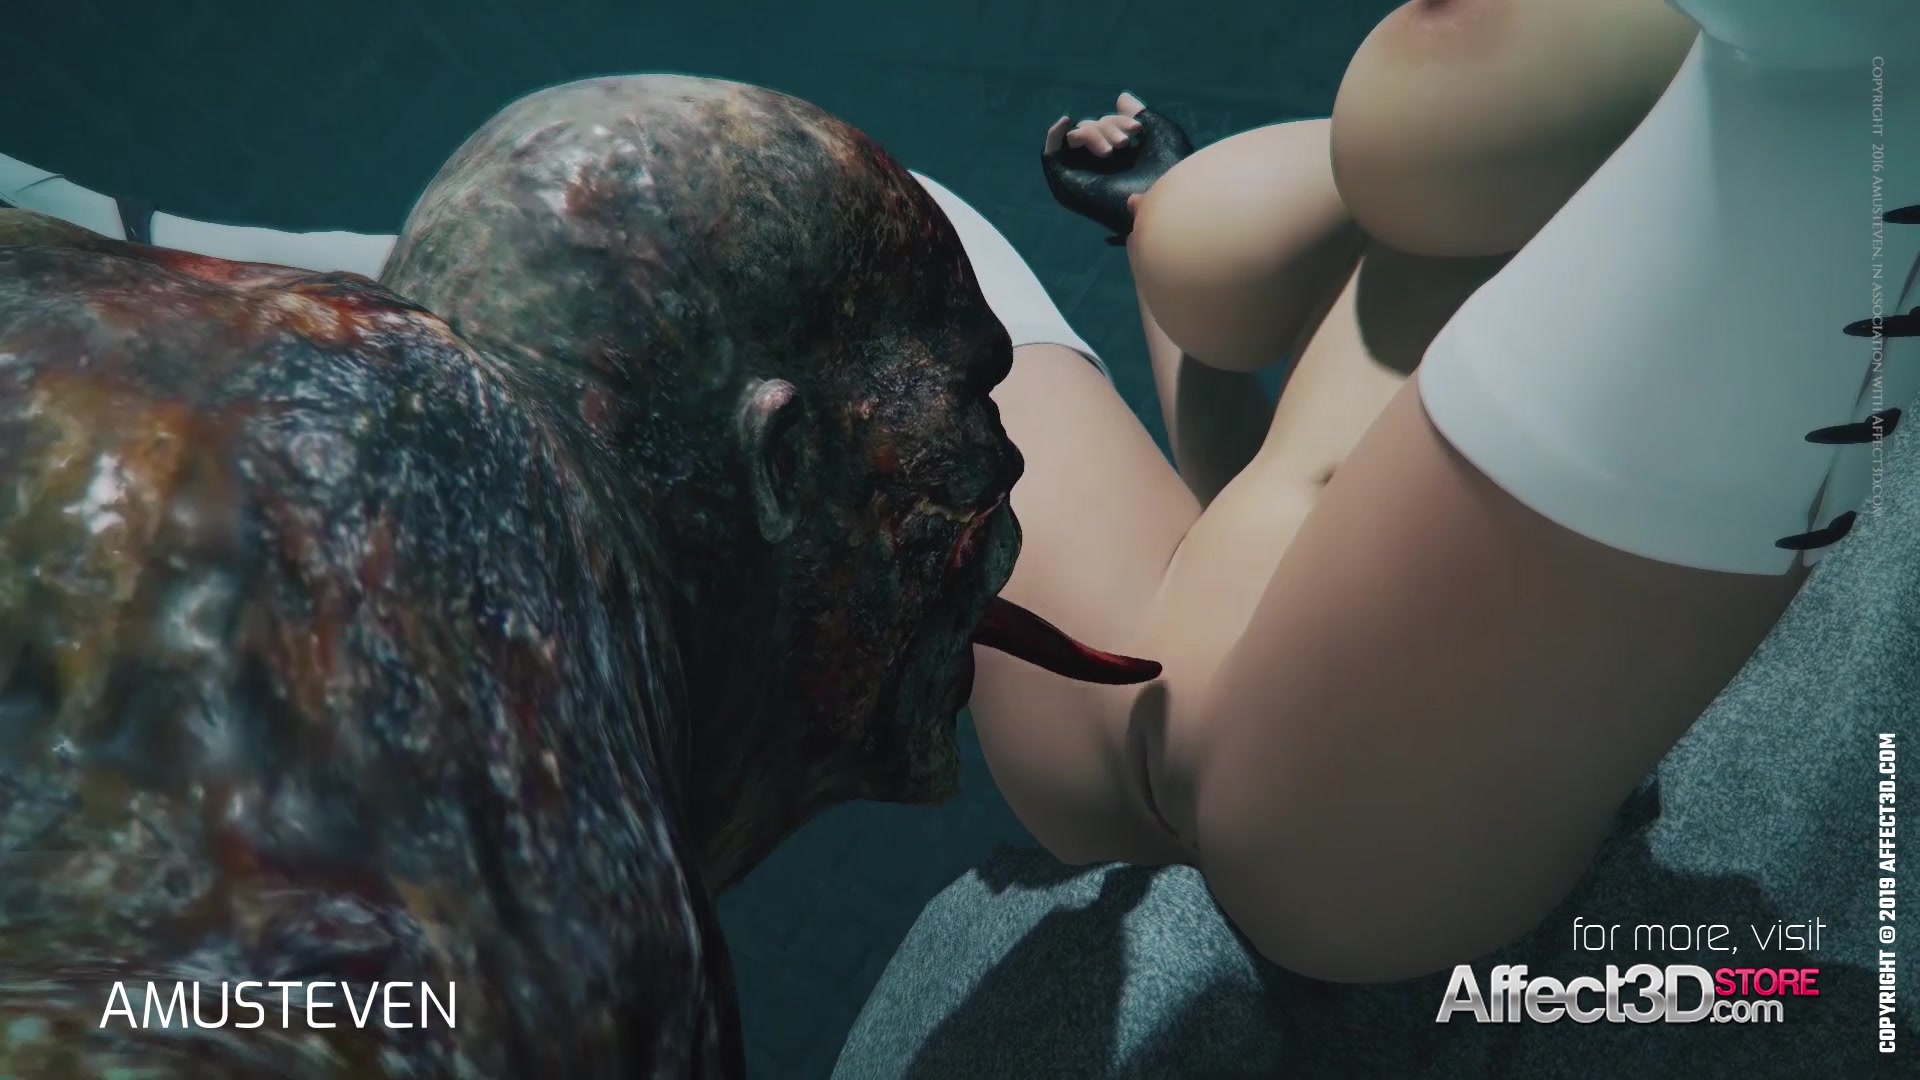 Monster 3d Big Boobs - 3d animation monster sex with a redhead big tits babe